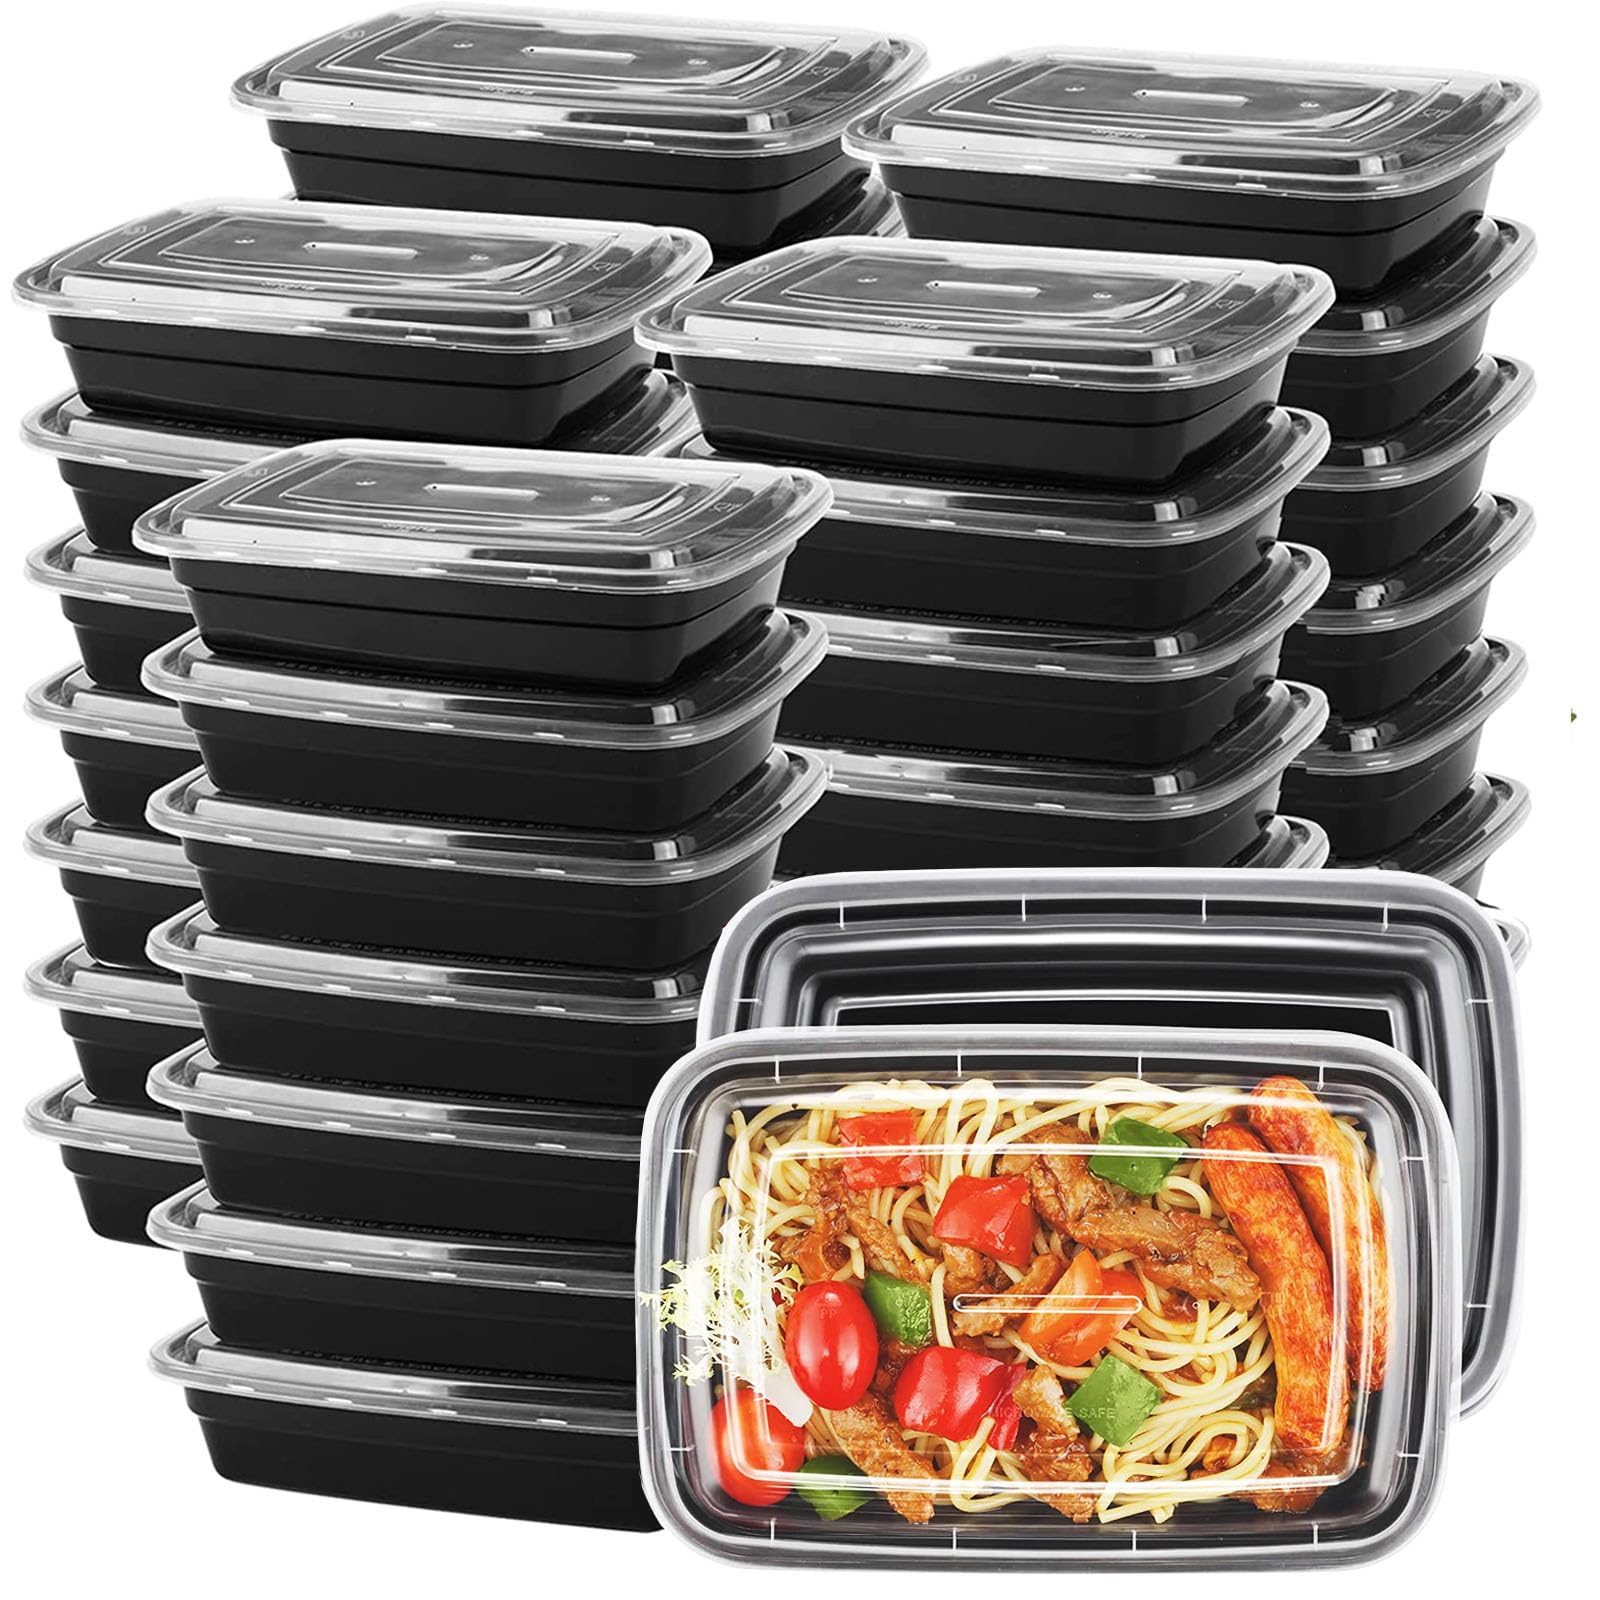 MORDEN MS Meal Prep Container 50 PACK 33oz Reusable Food Storage Containers With Lids - Microwave, Freezers & Dishwashers Safe - Stackable Storage Bento Lunch Boxes To-go Container